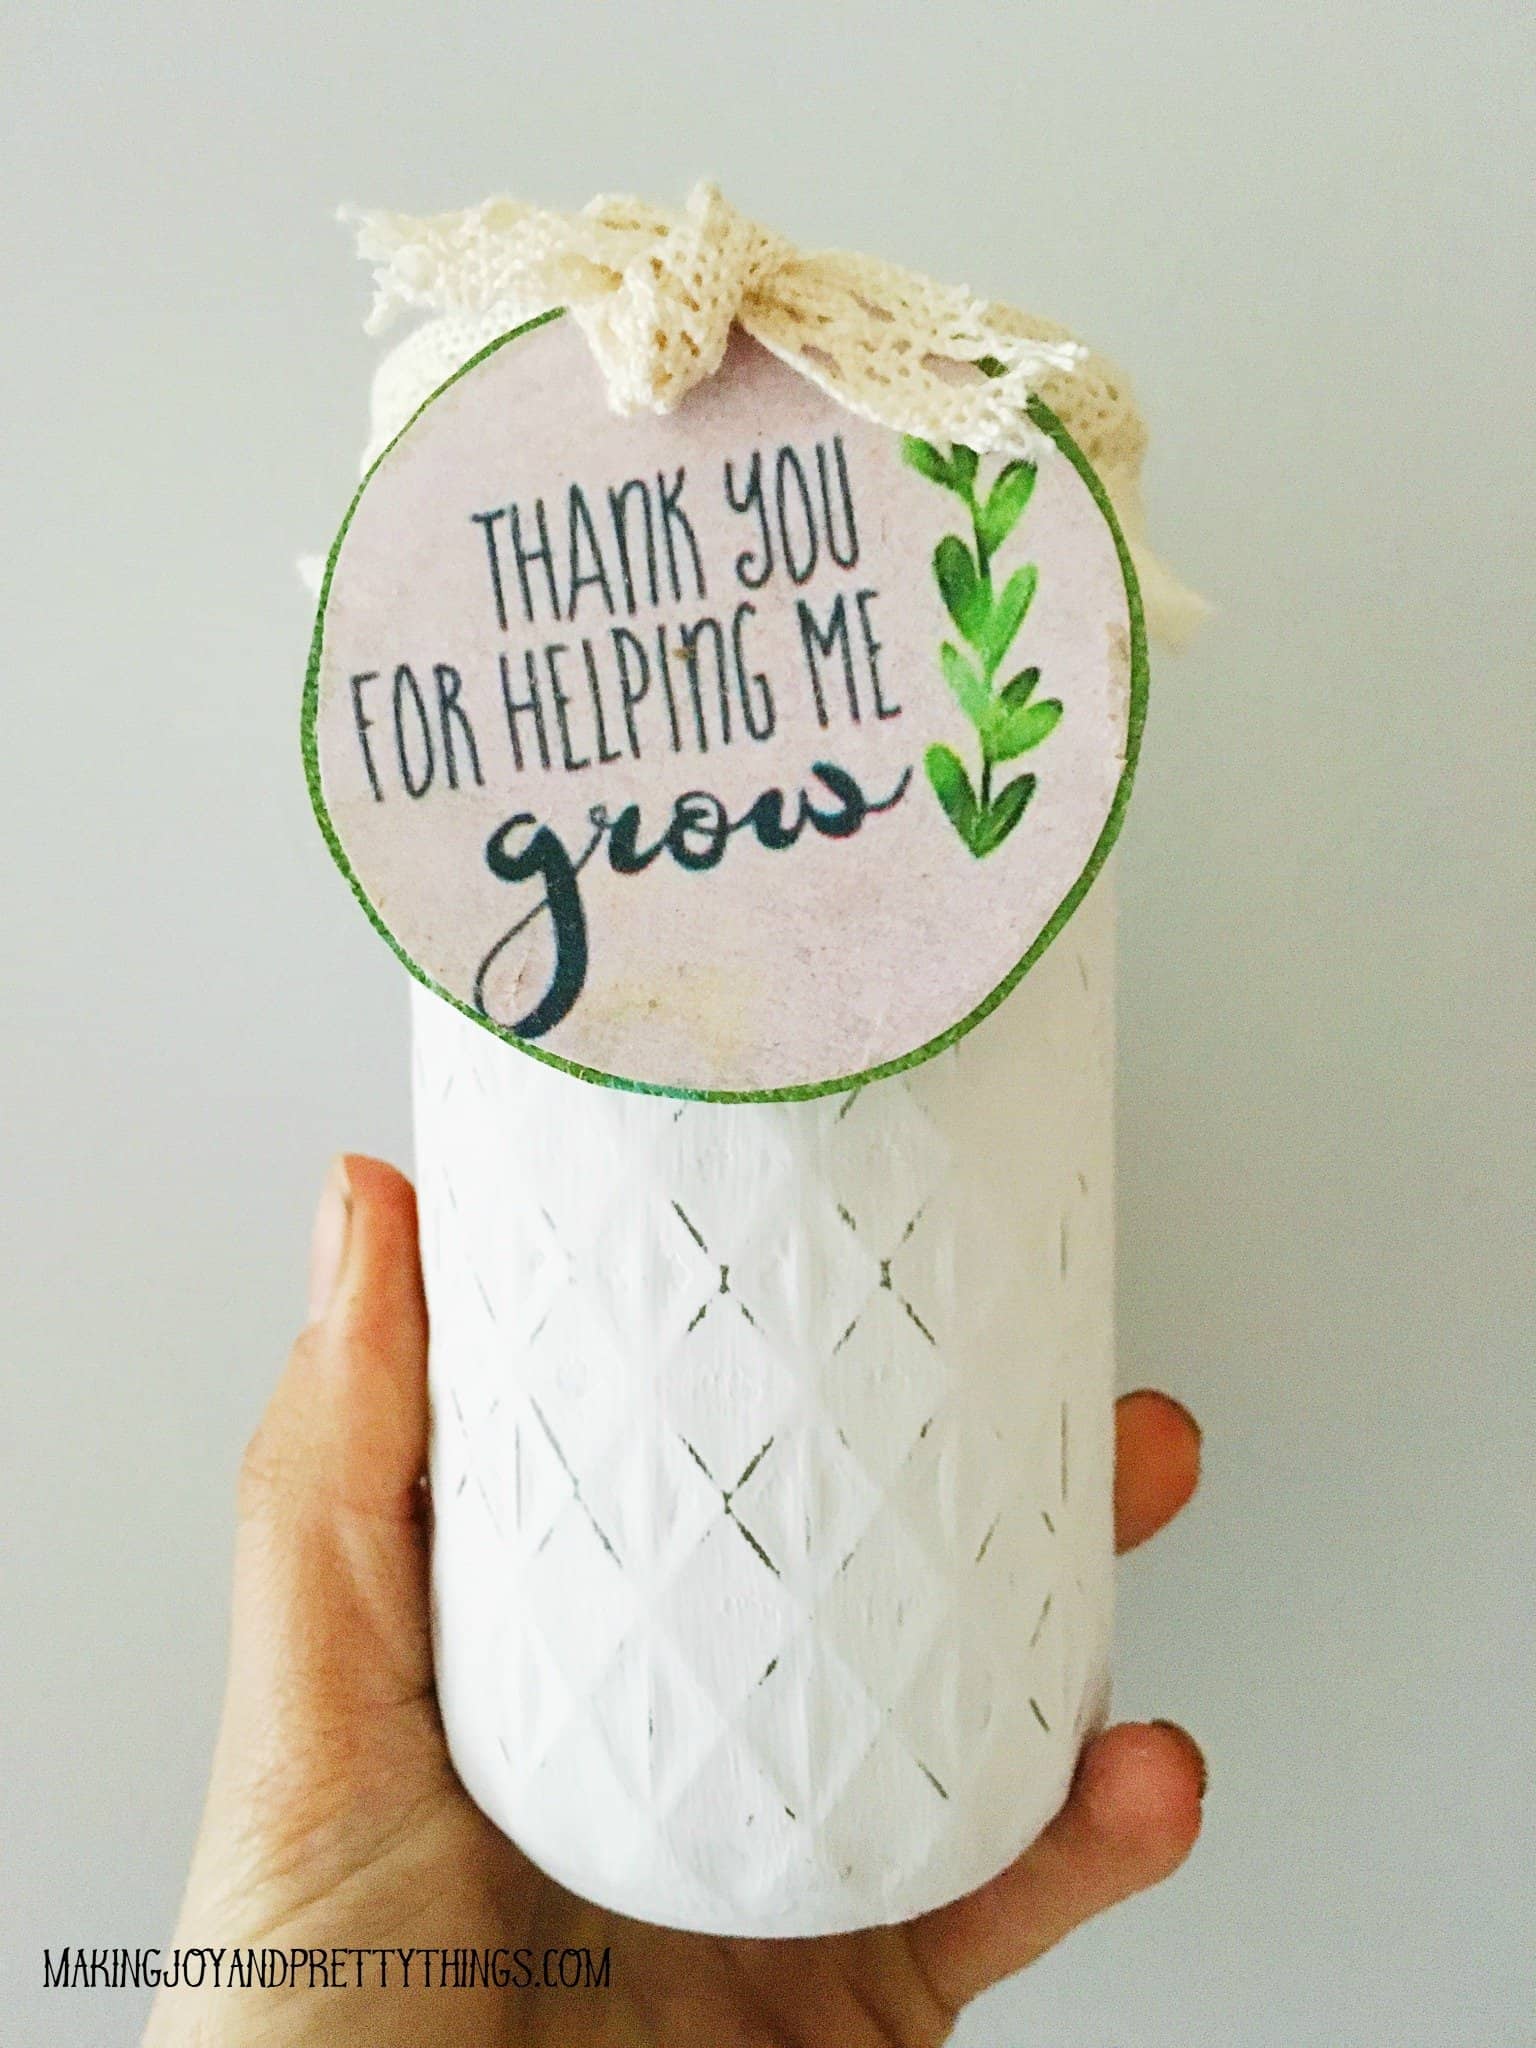 This DIY teacher appreciation gift will really make their day when your child bring it to school during appreciation week